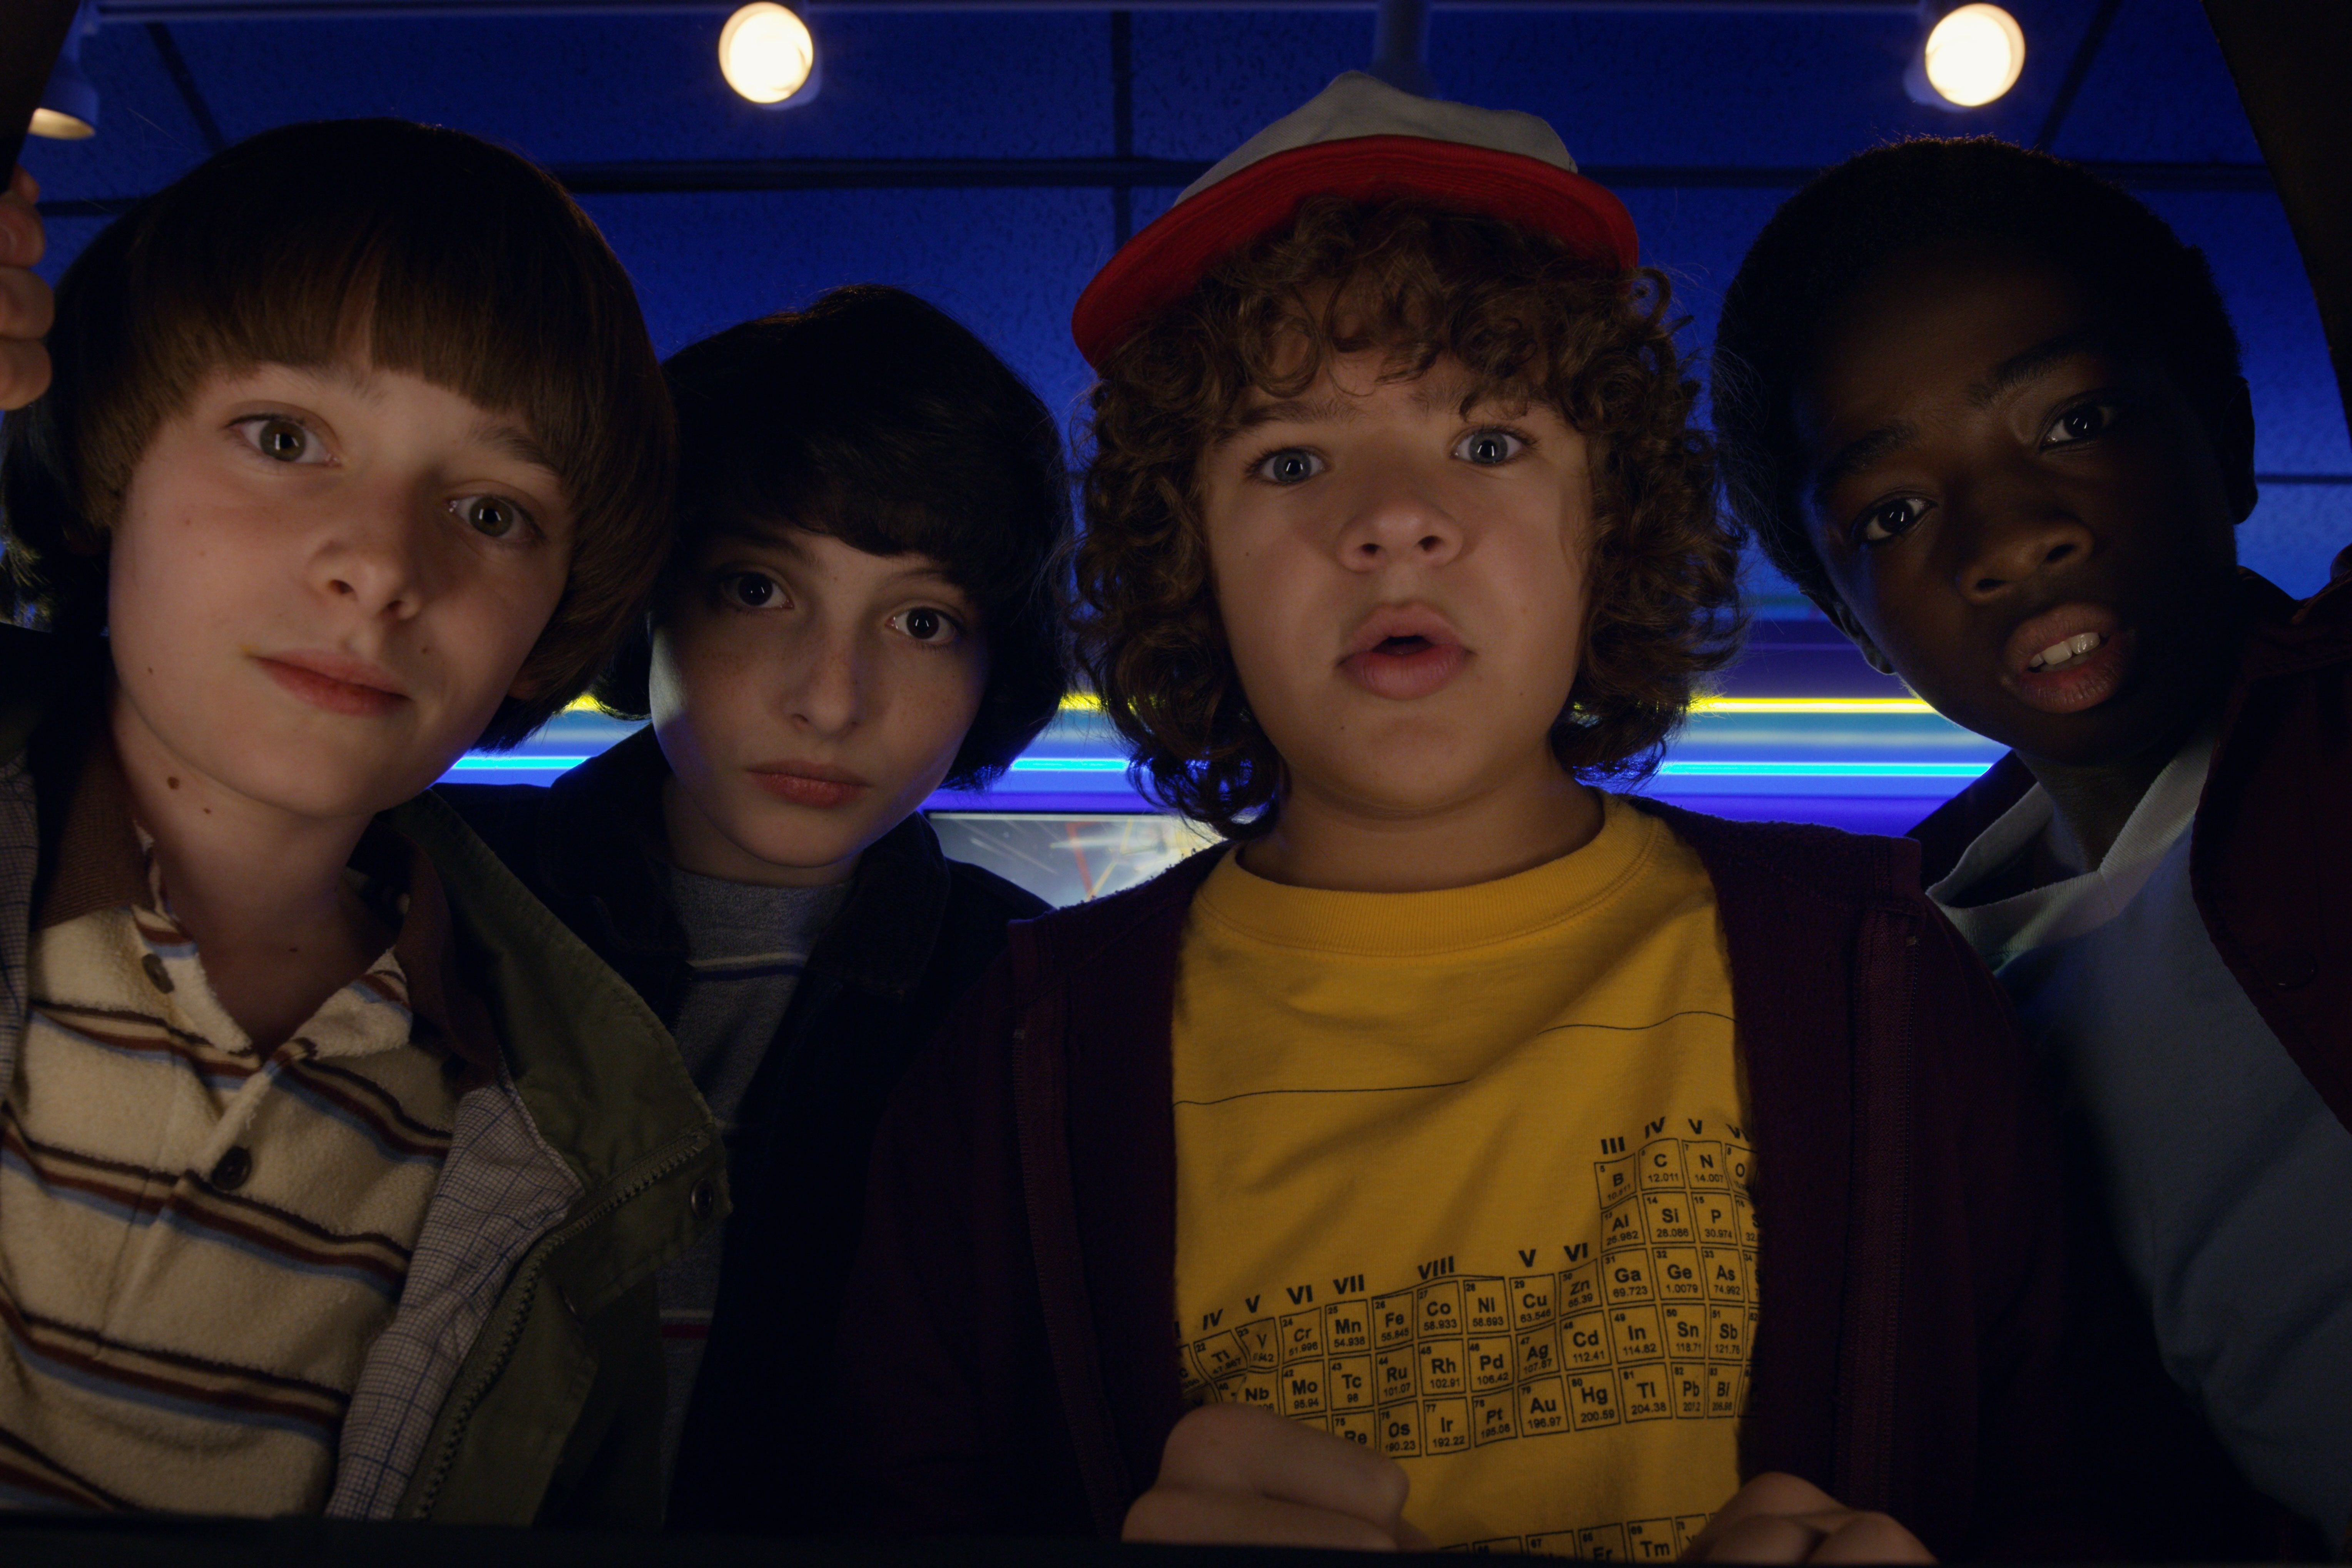 Stranger Things” Fans Have Noticed a Couple of Similarities